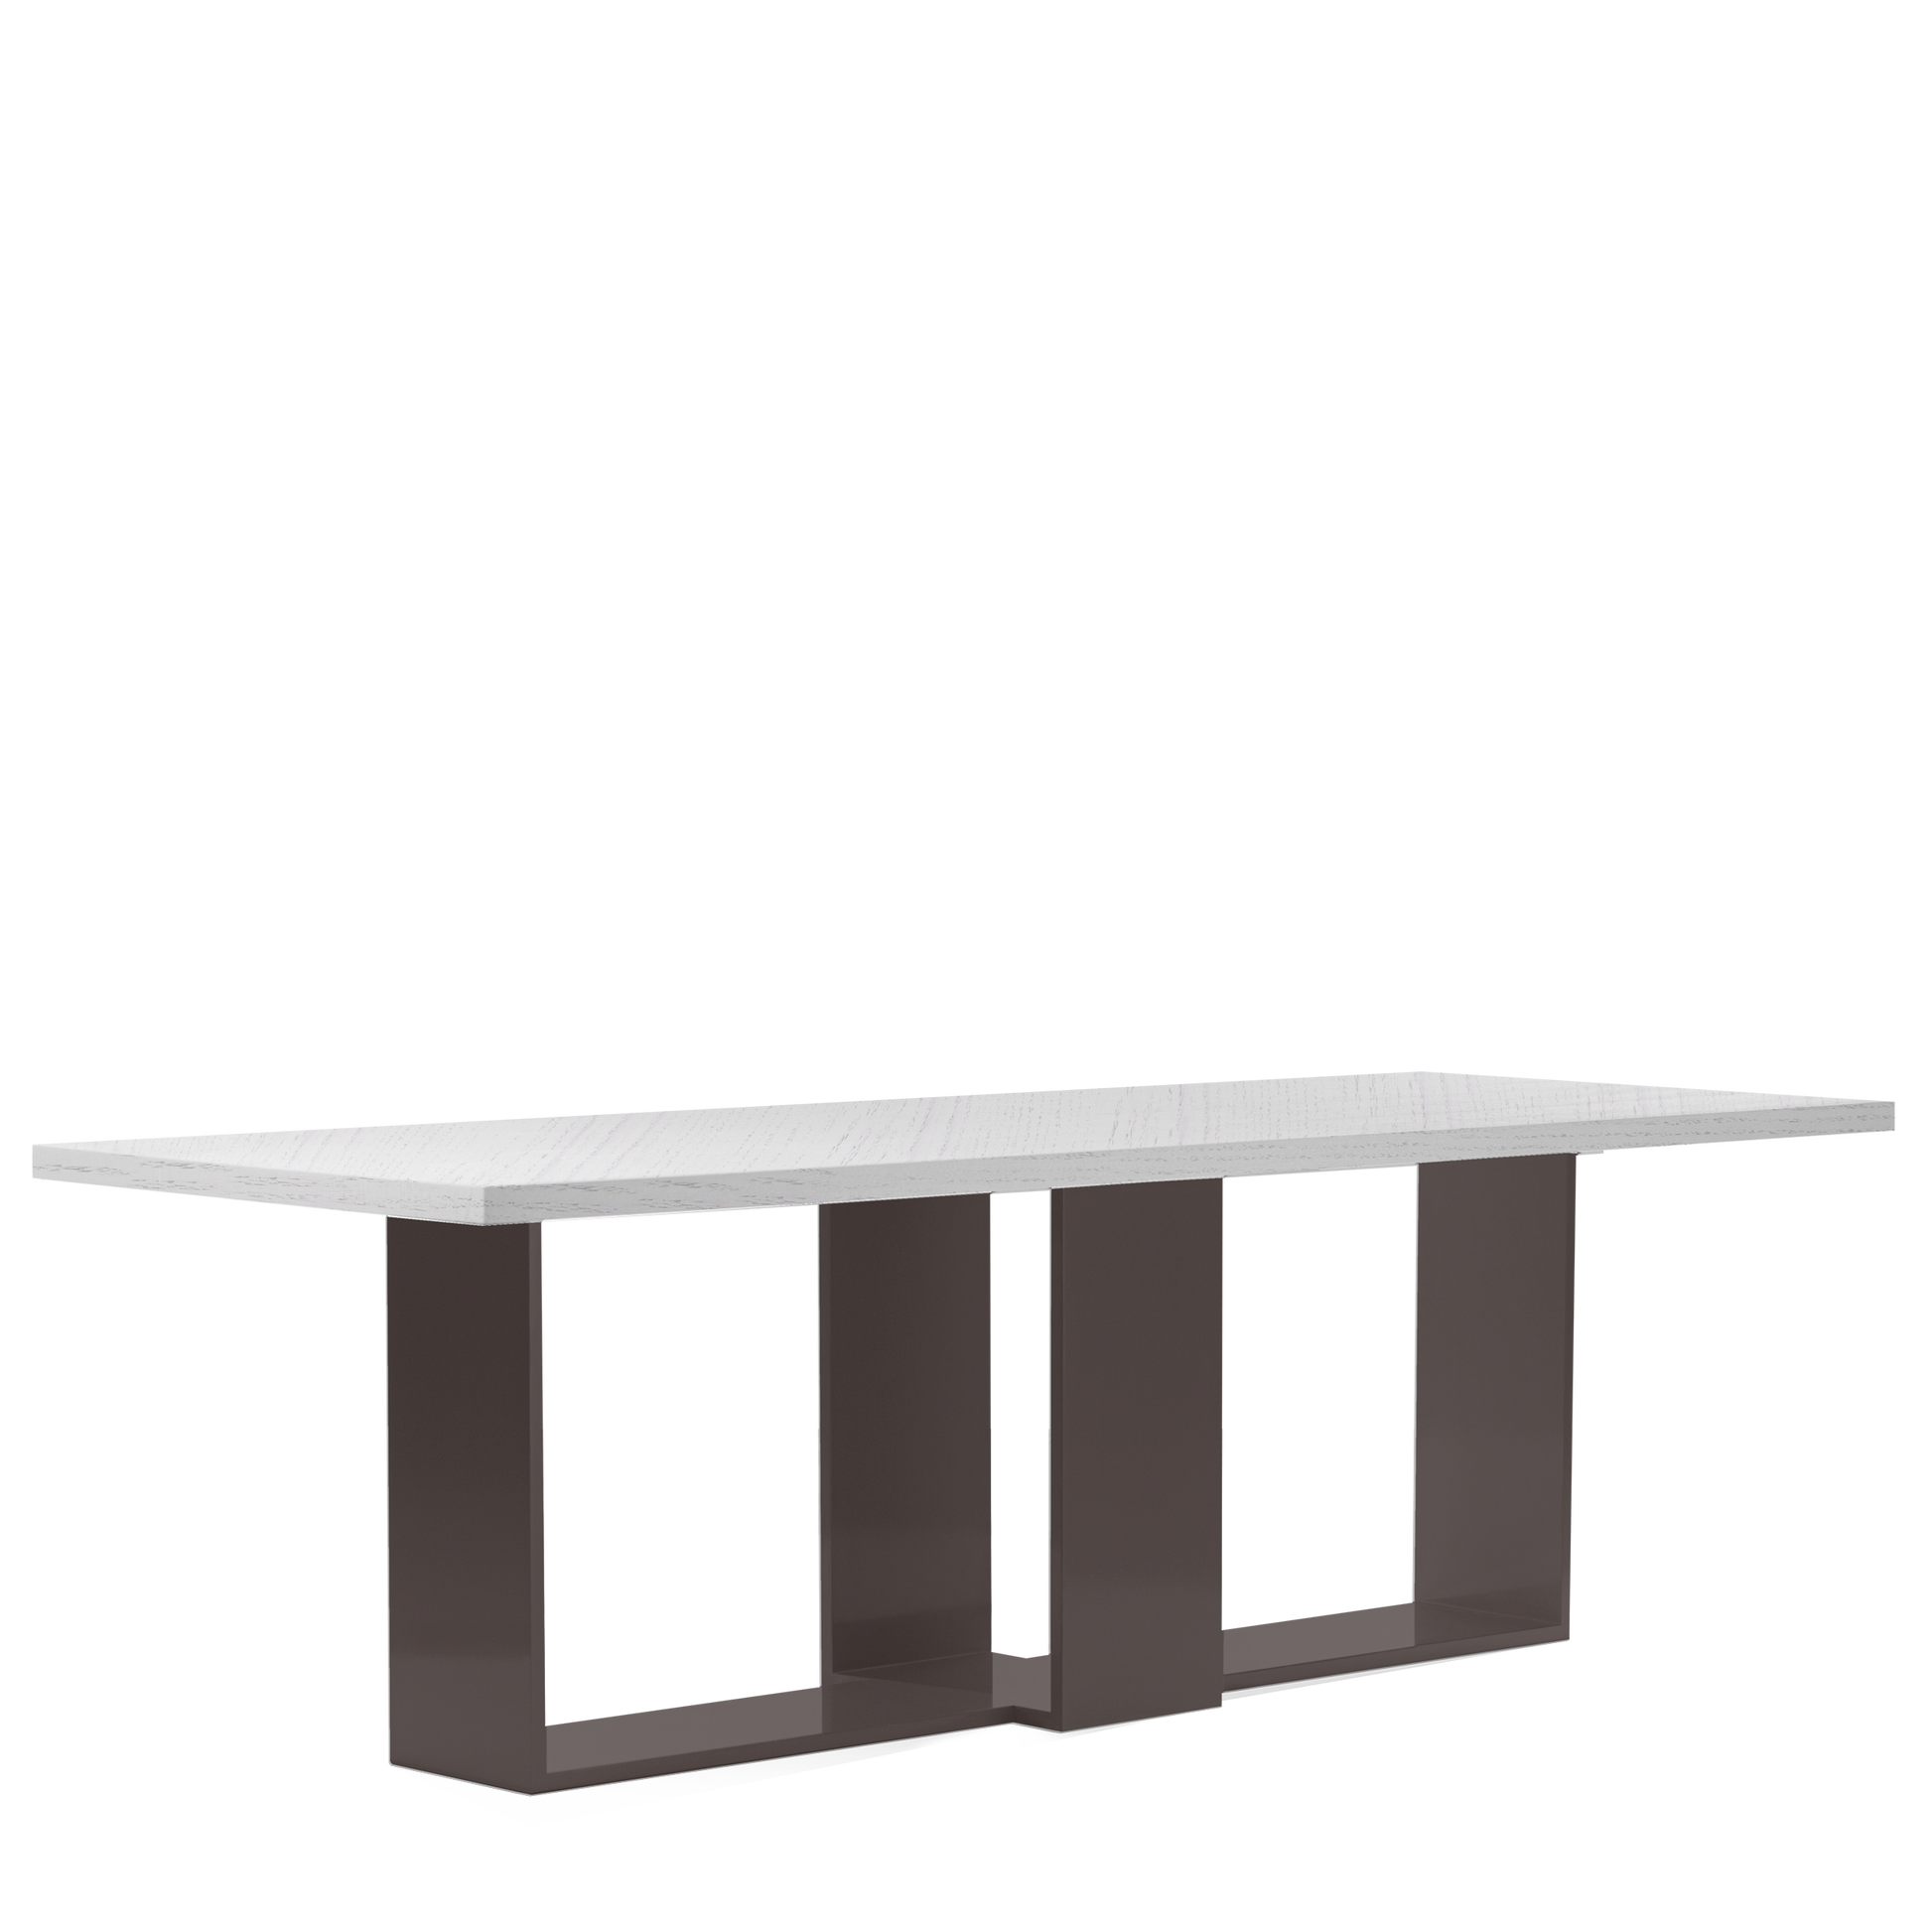 Front view of ARENA Rectangular dining table with white matte table top